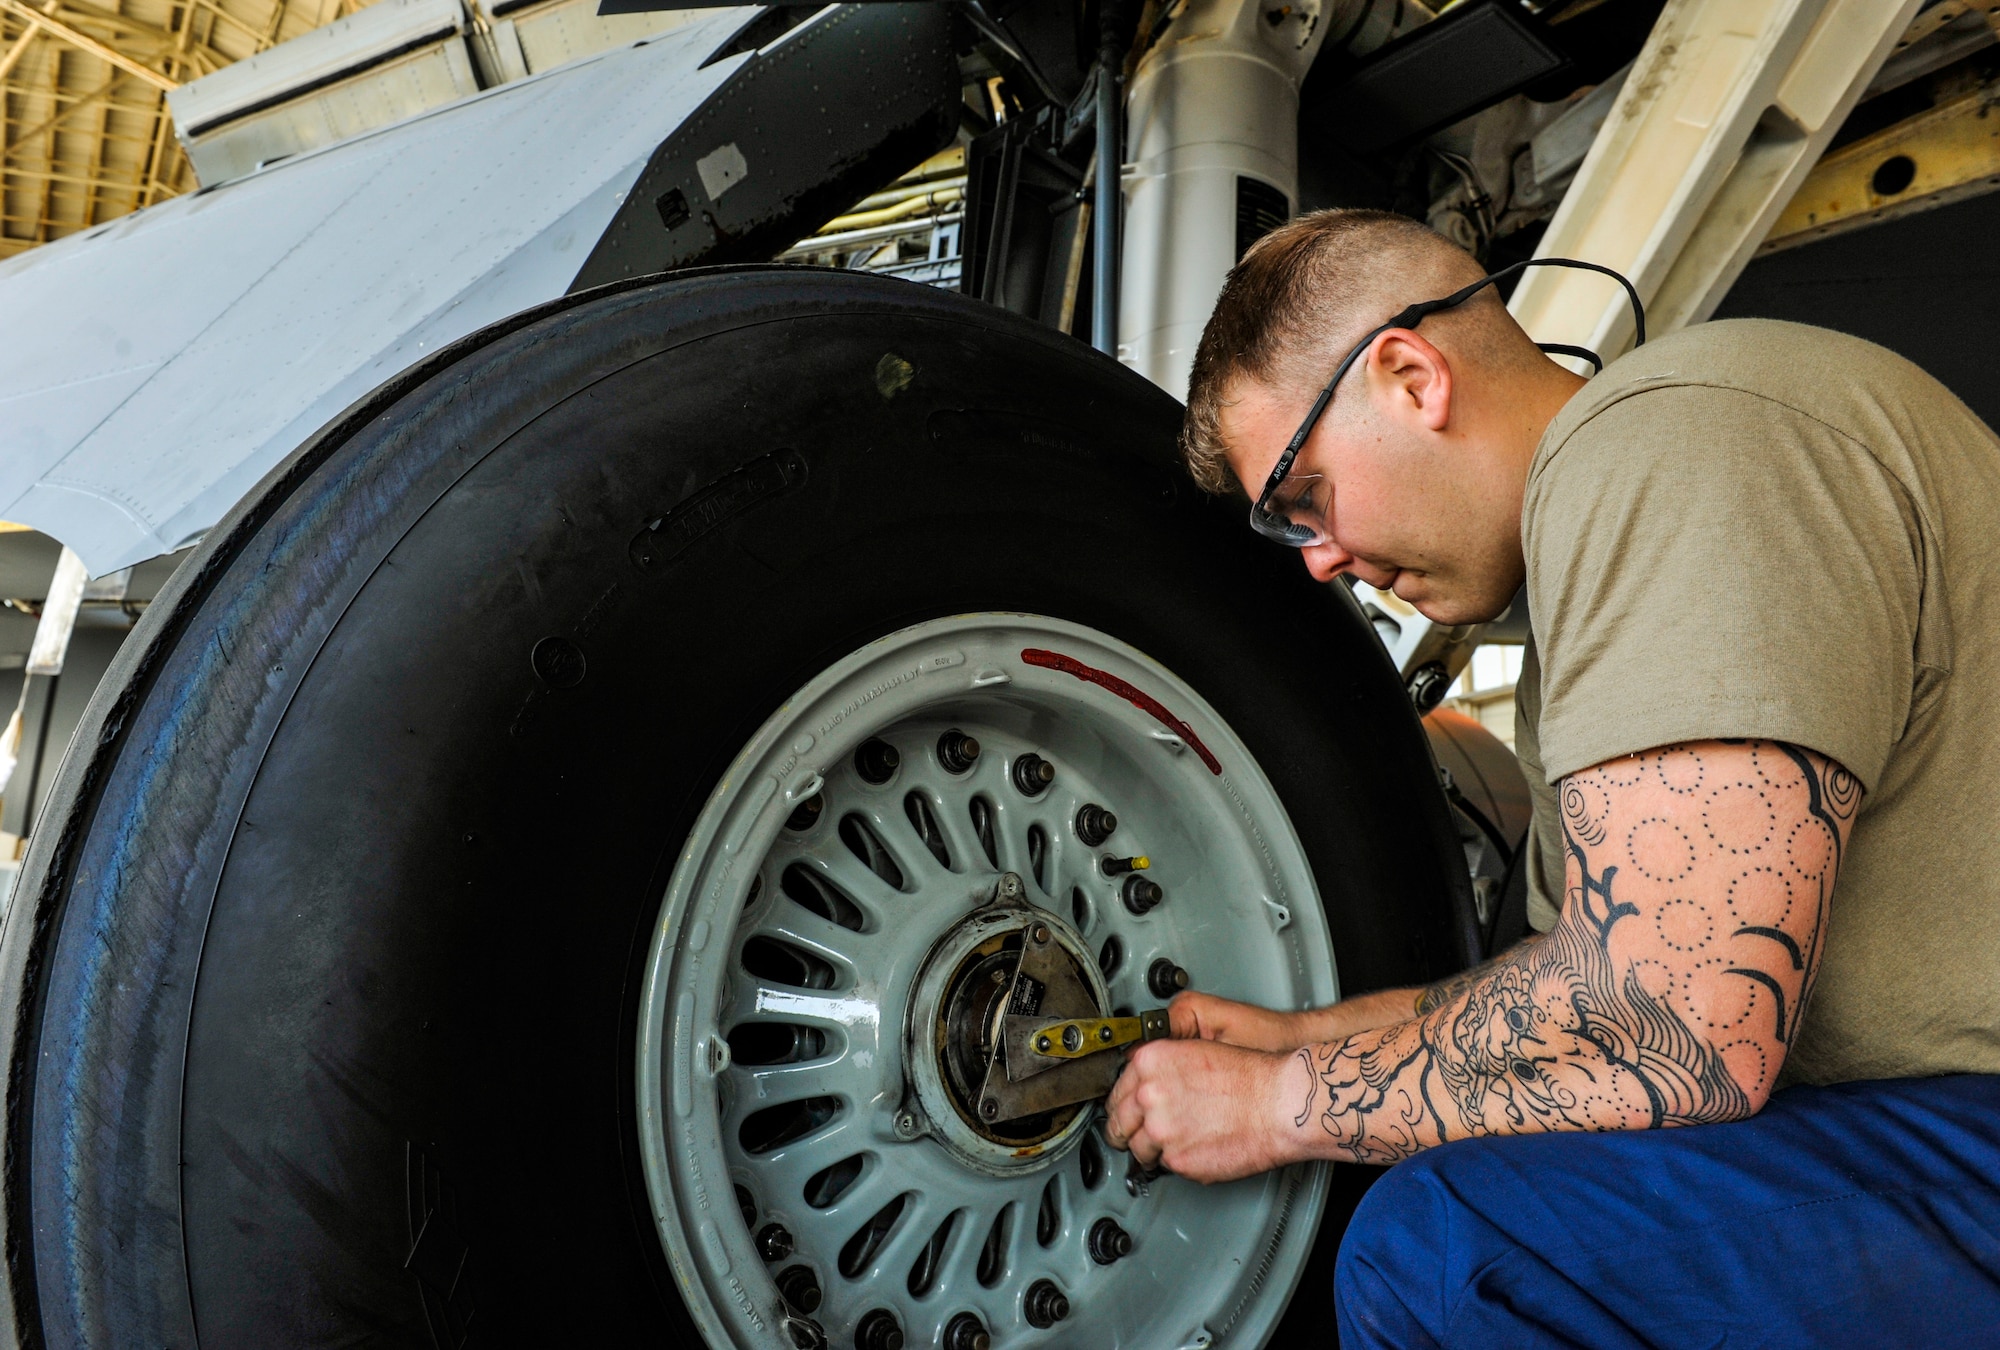 U.S. Air Force Airman 1st Class Andrew Roberts, aircraft inspection apprentice assigned to the 18th Equipment Maintenance Squadron, unscrews bolts from a wheel cap of KC-135 Stratotanker during an isochronal inspection at Kadena Air Base, Japan, May 22, 2019.